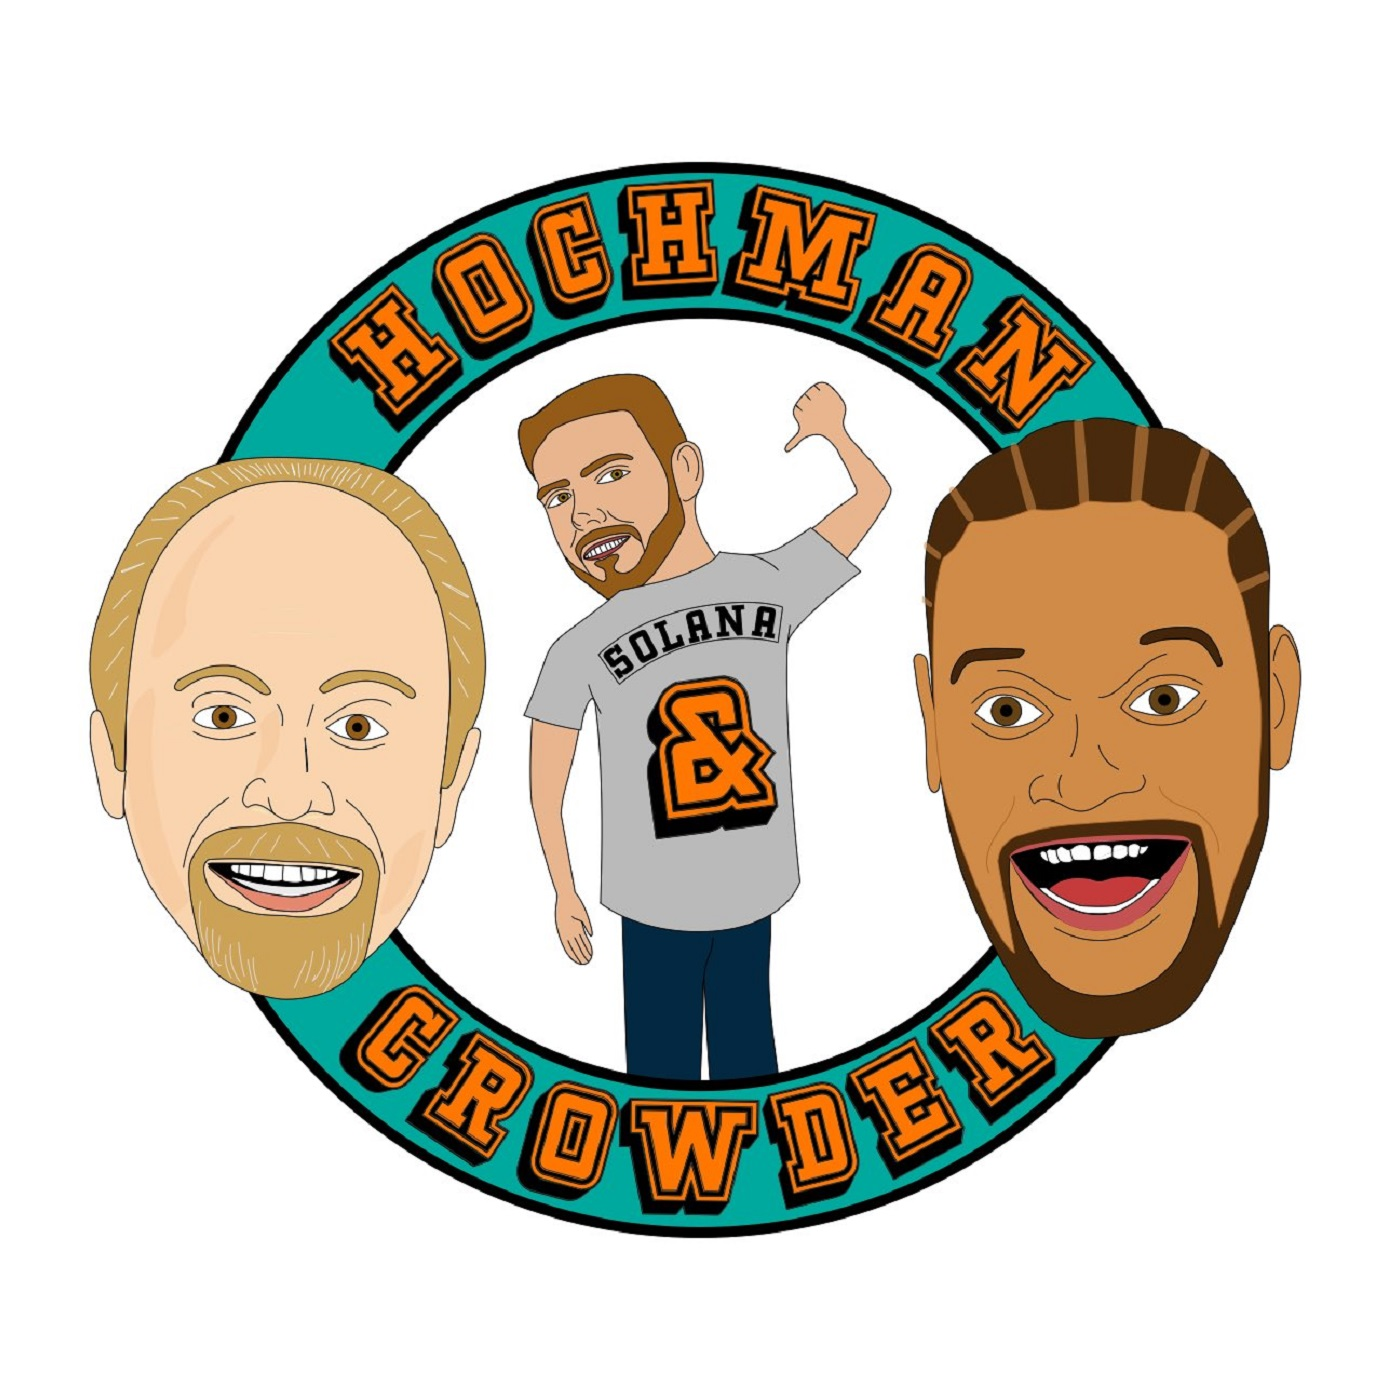 08-06-2019 - Hoch and Crowder Podcast Hour 3